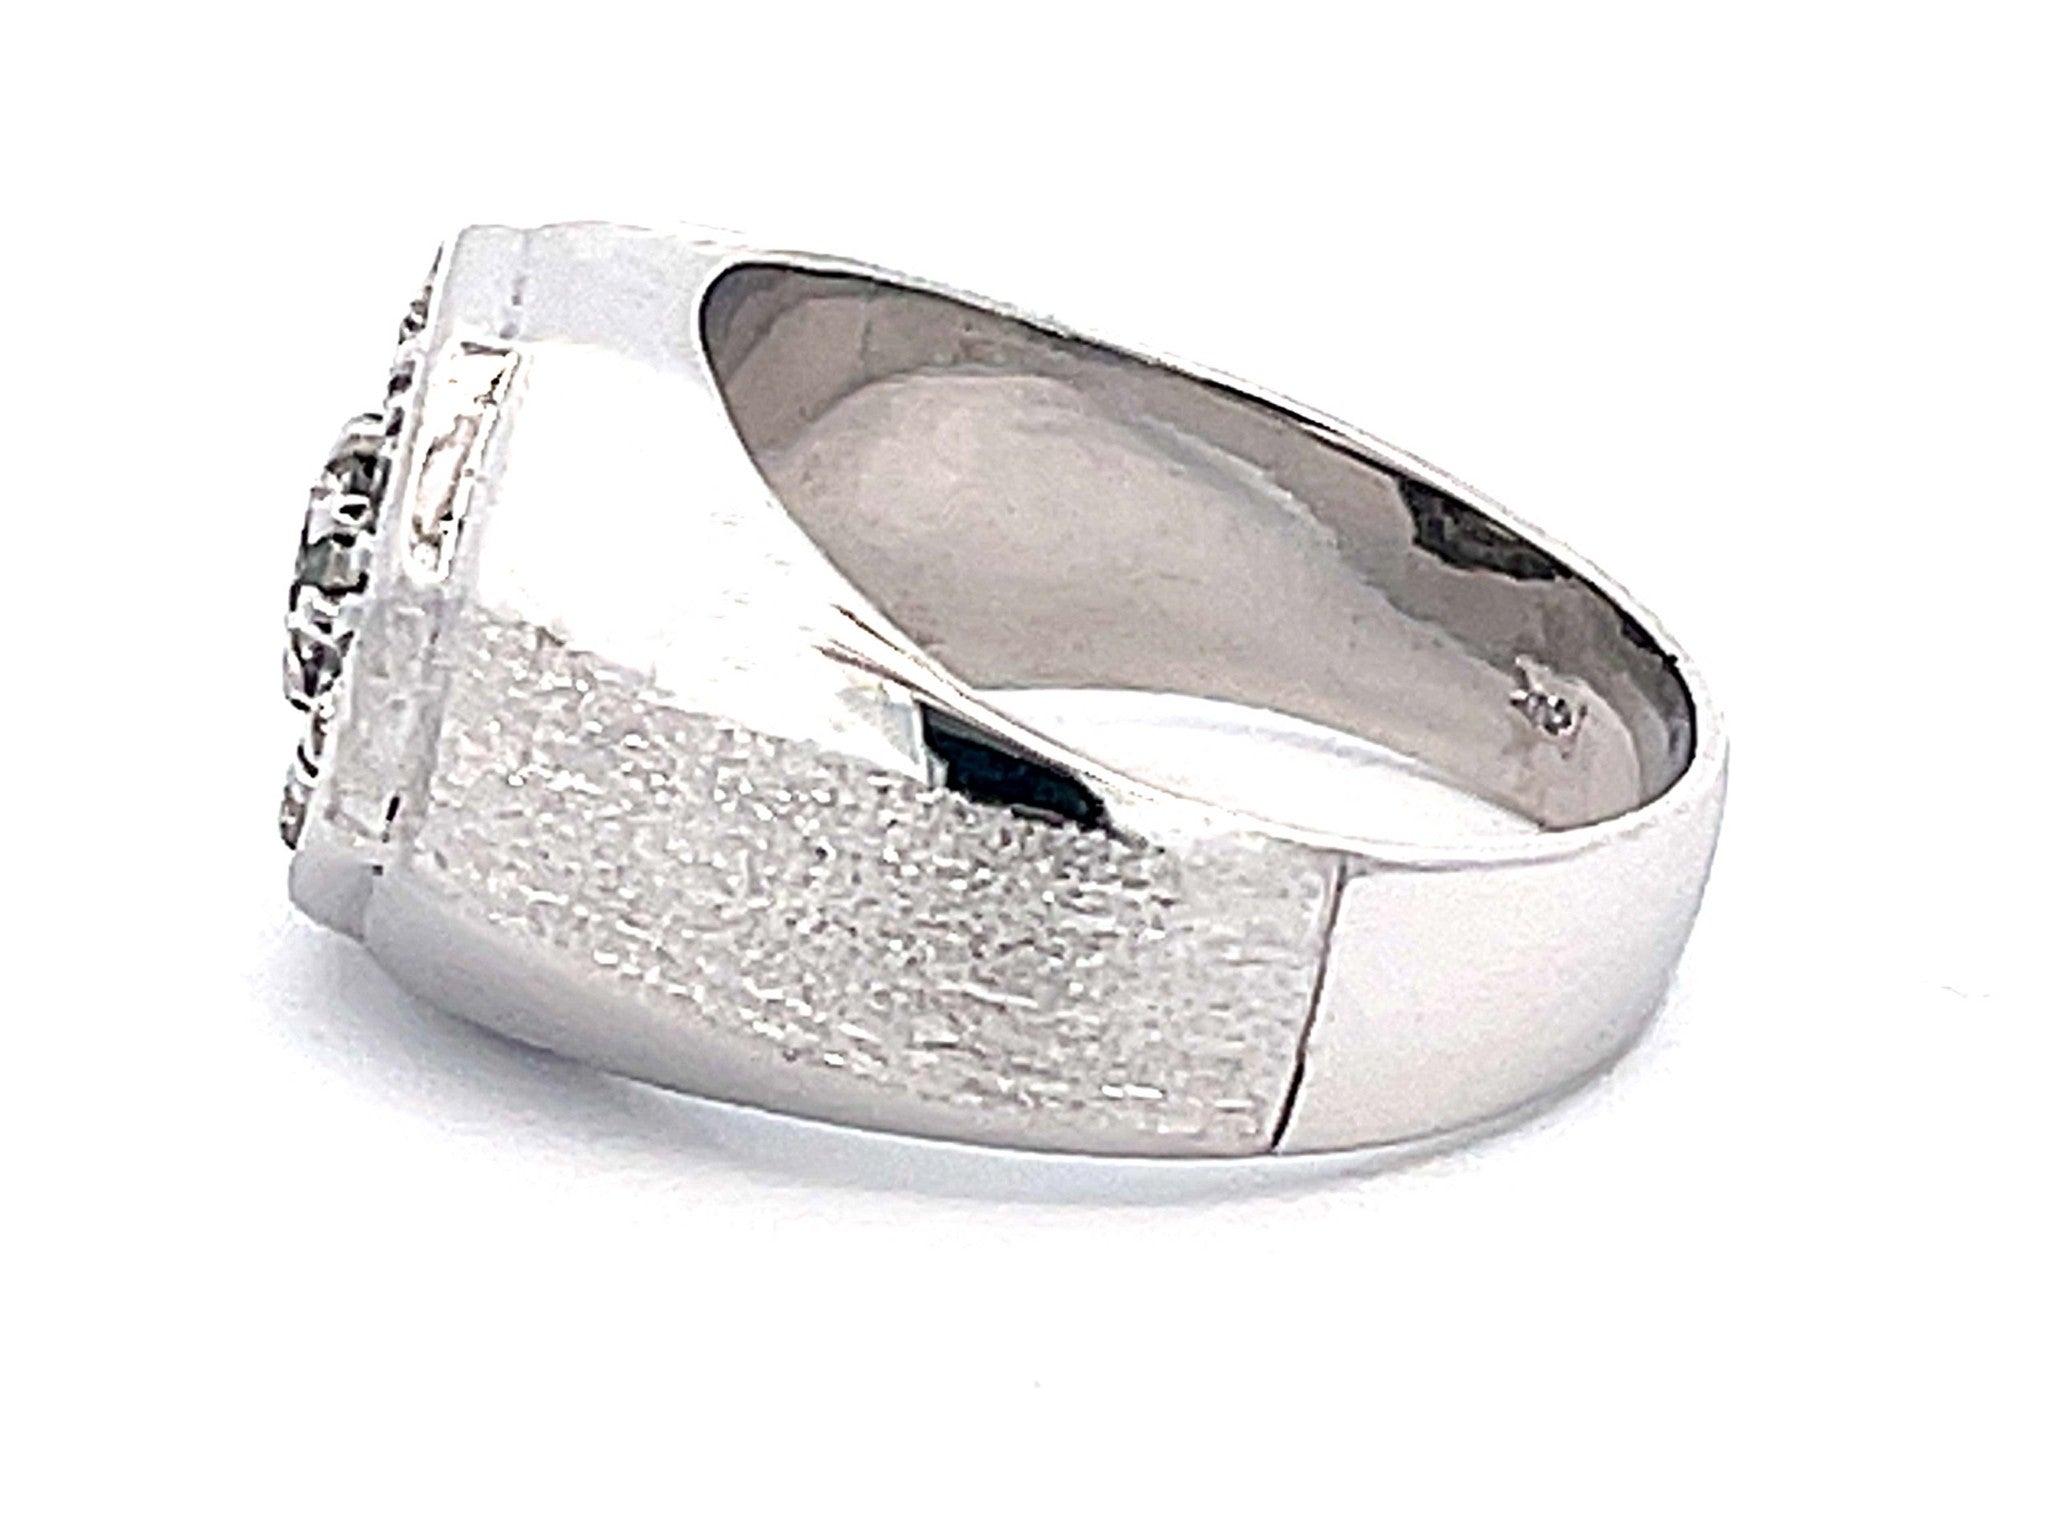 Mens Round Diamond Cluster Center Ring with Textured Shoulders in 14k White Gold